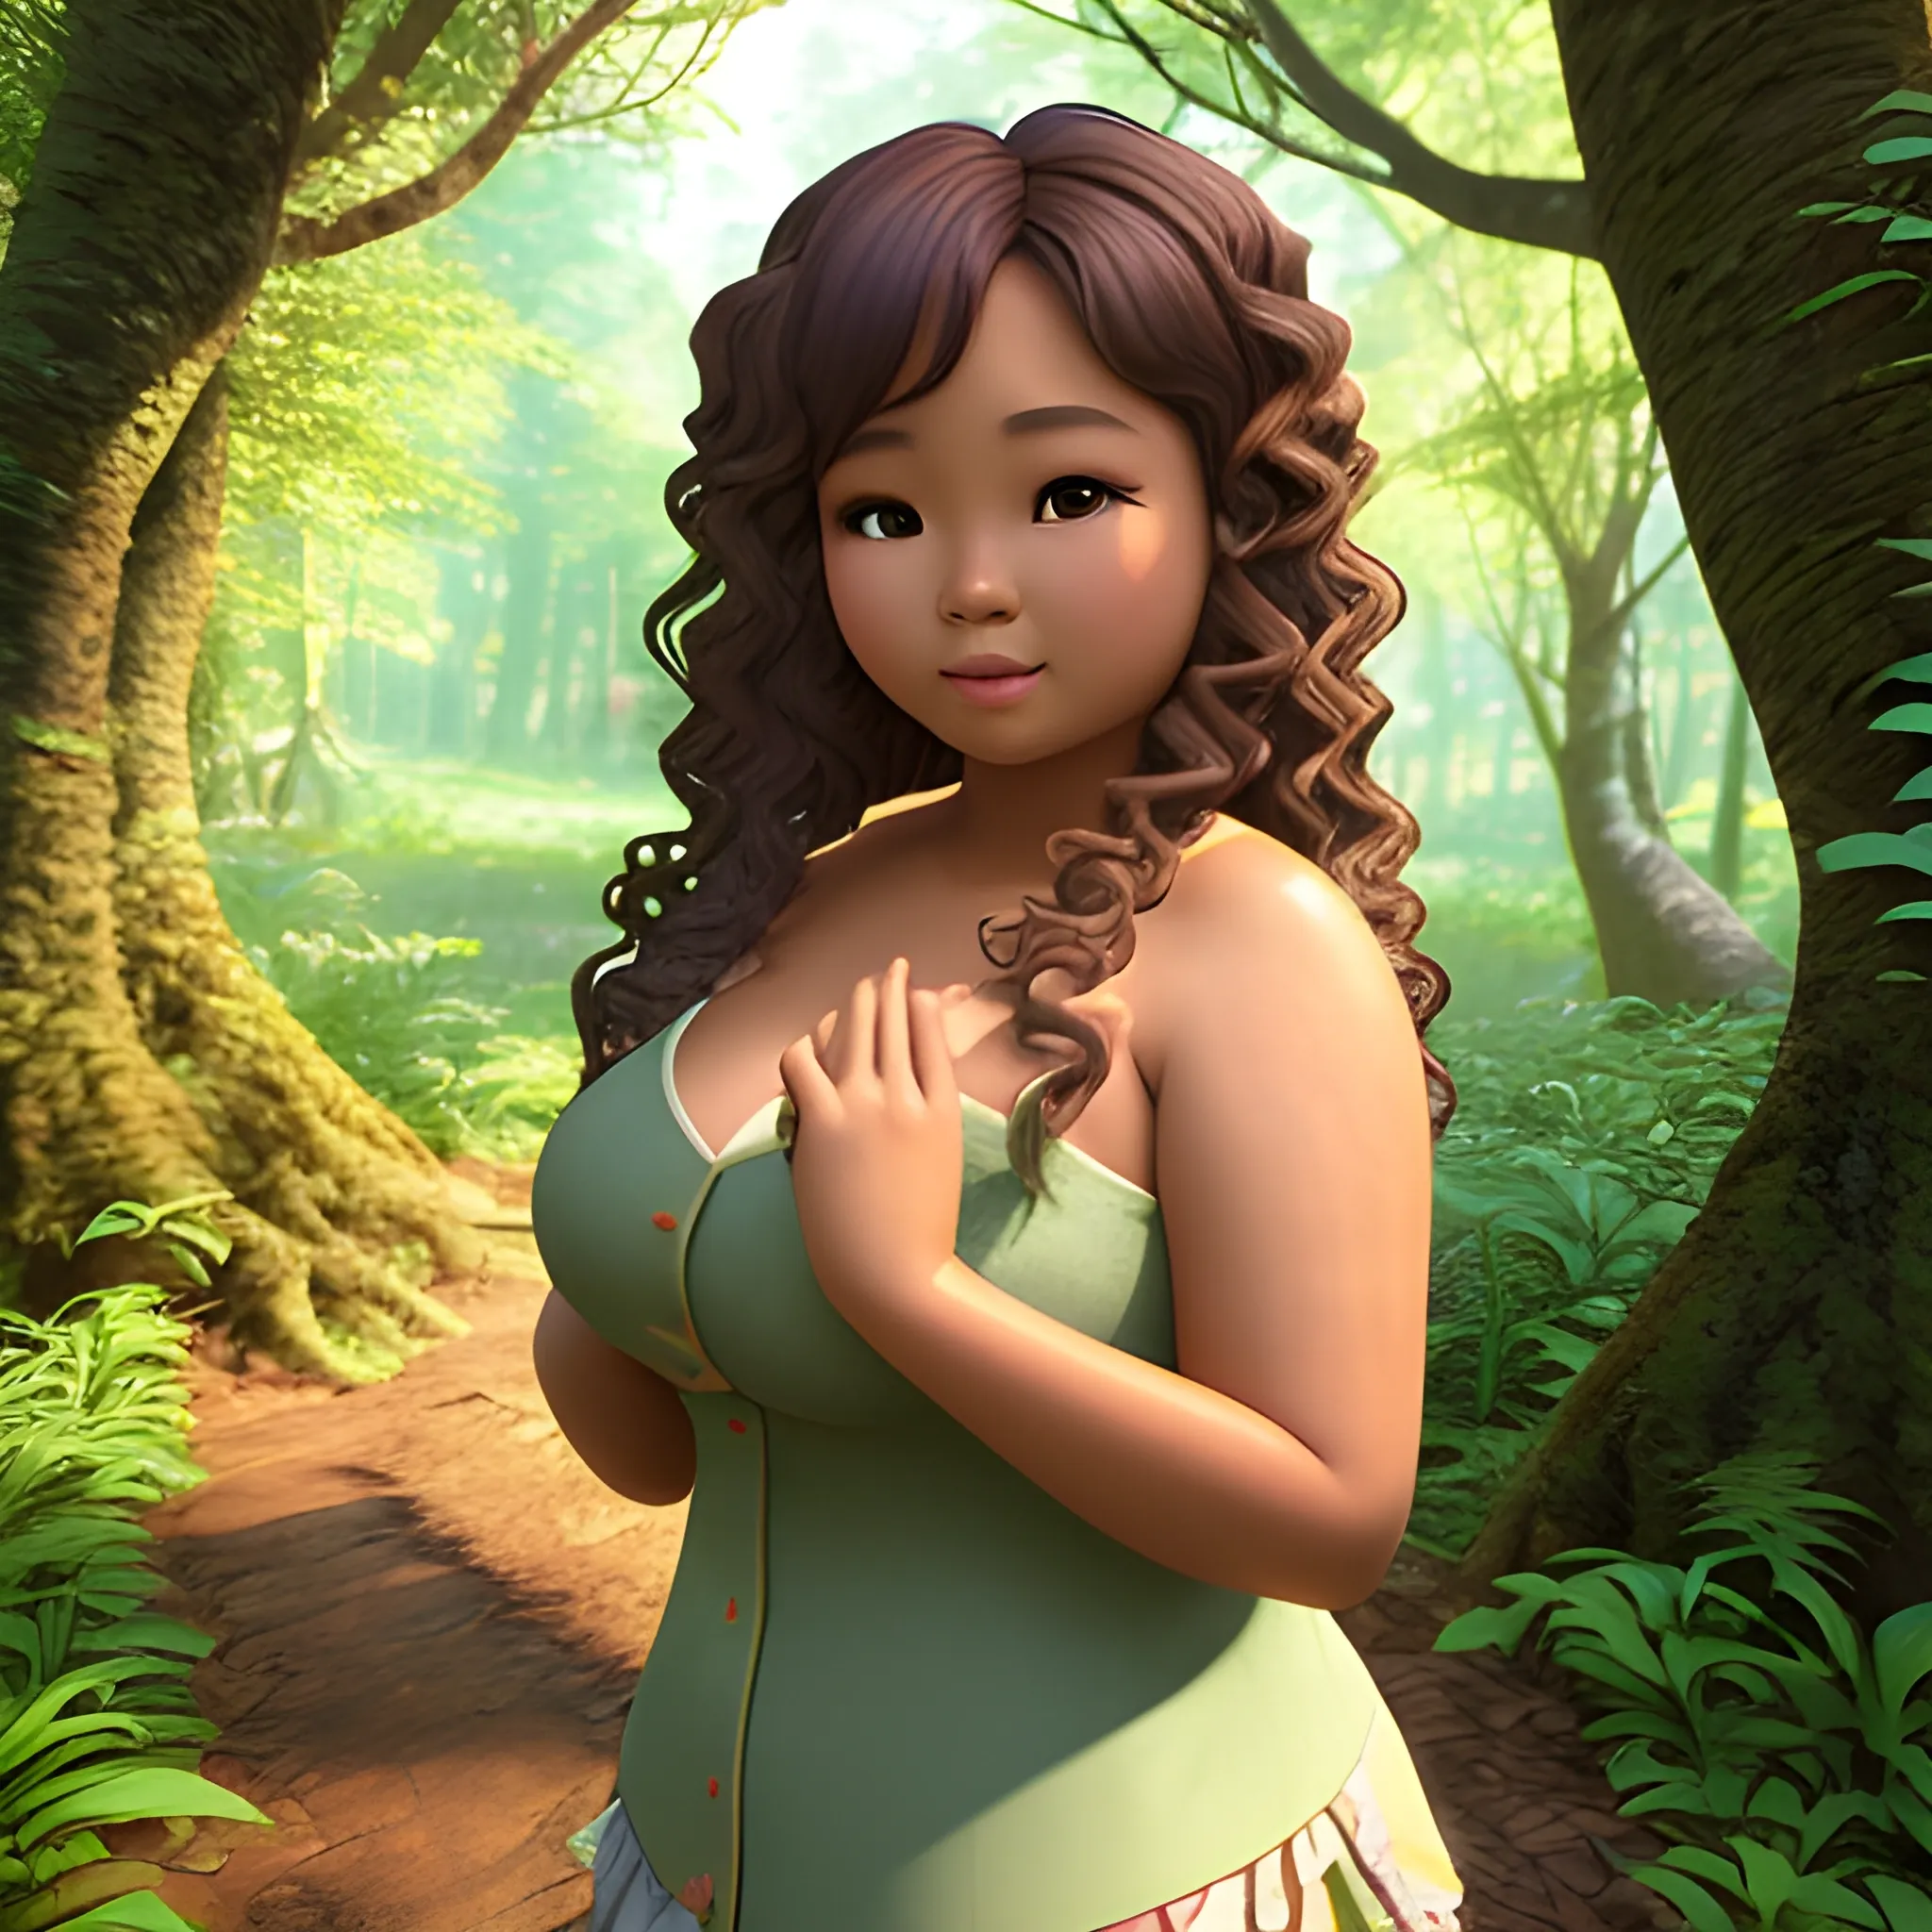 Thick tanned skin beautiful chubby filipina woman with beautiful curly hair and flat button nose, fairy in the woods, 3D